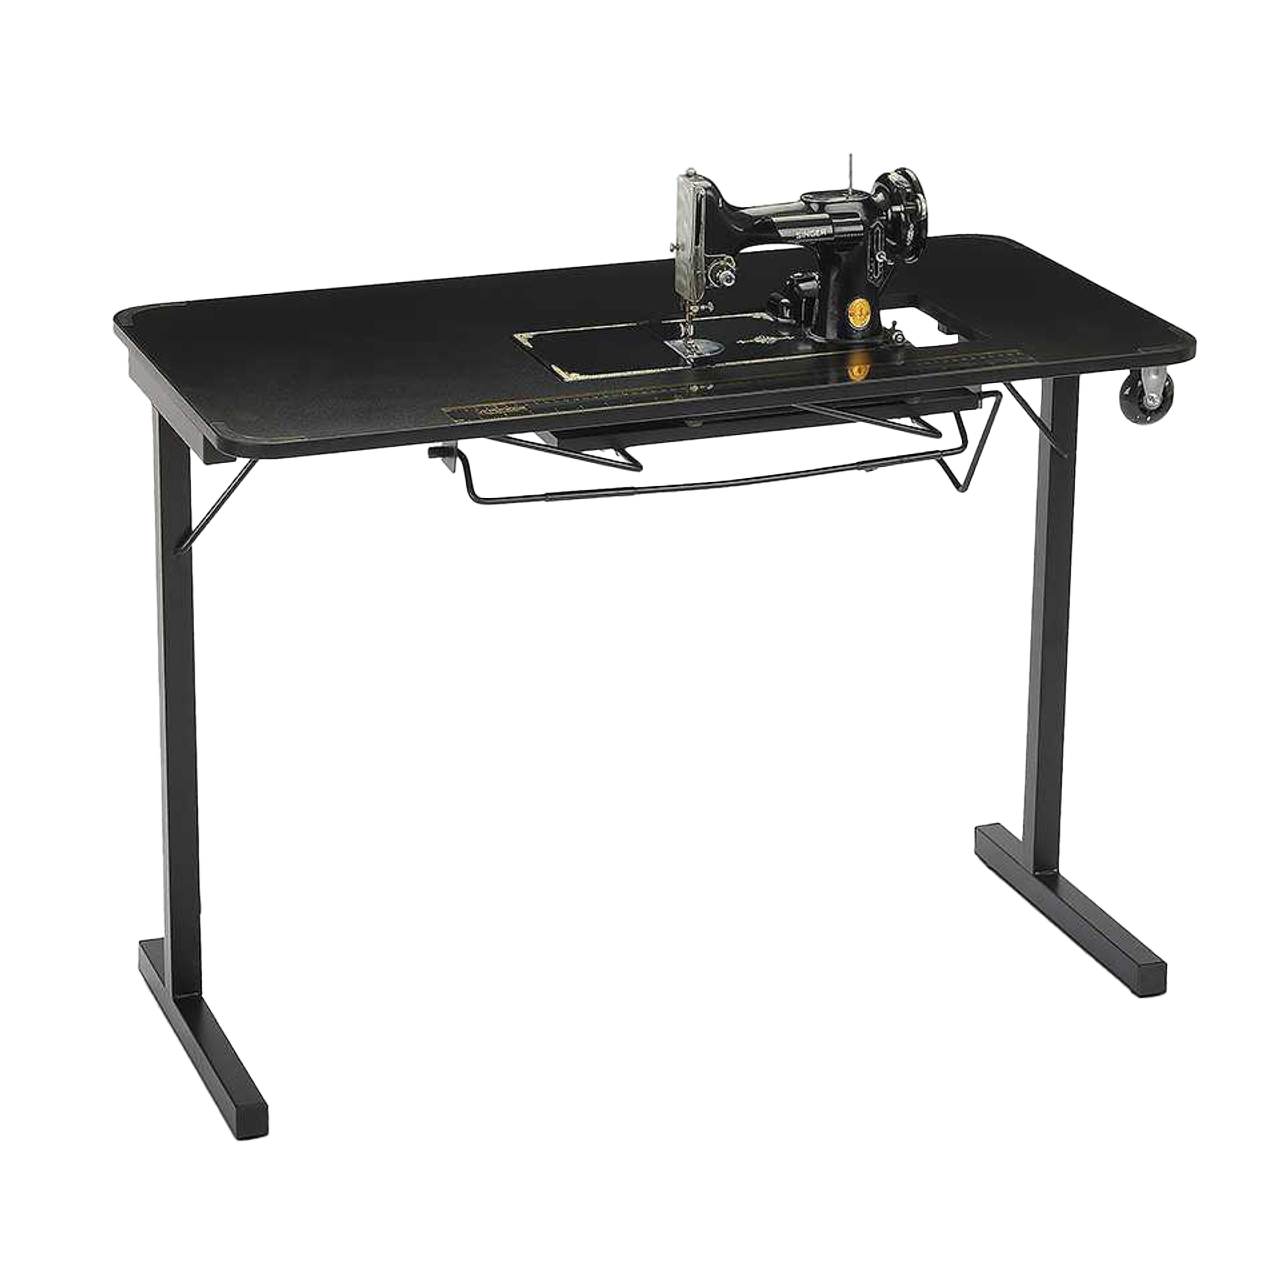 Arrow Sewing Heavyweight Sewing Table for Vintage Singer Machines 611F for Sale at World Weidner